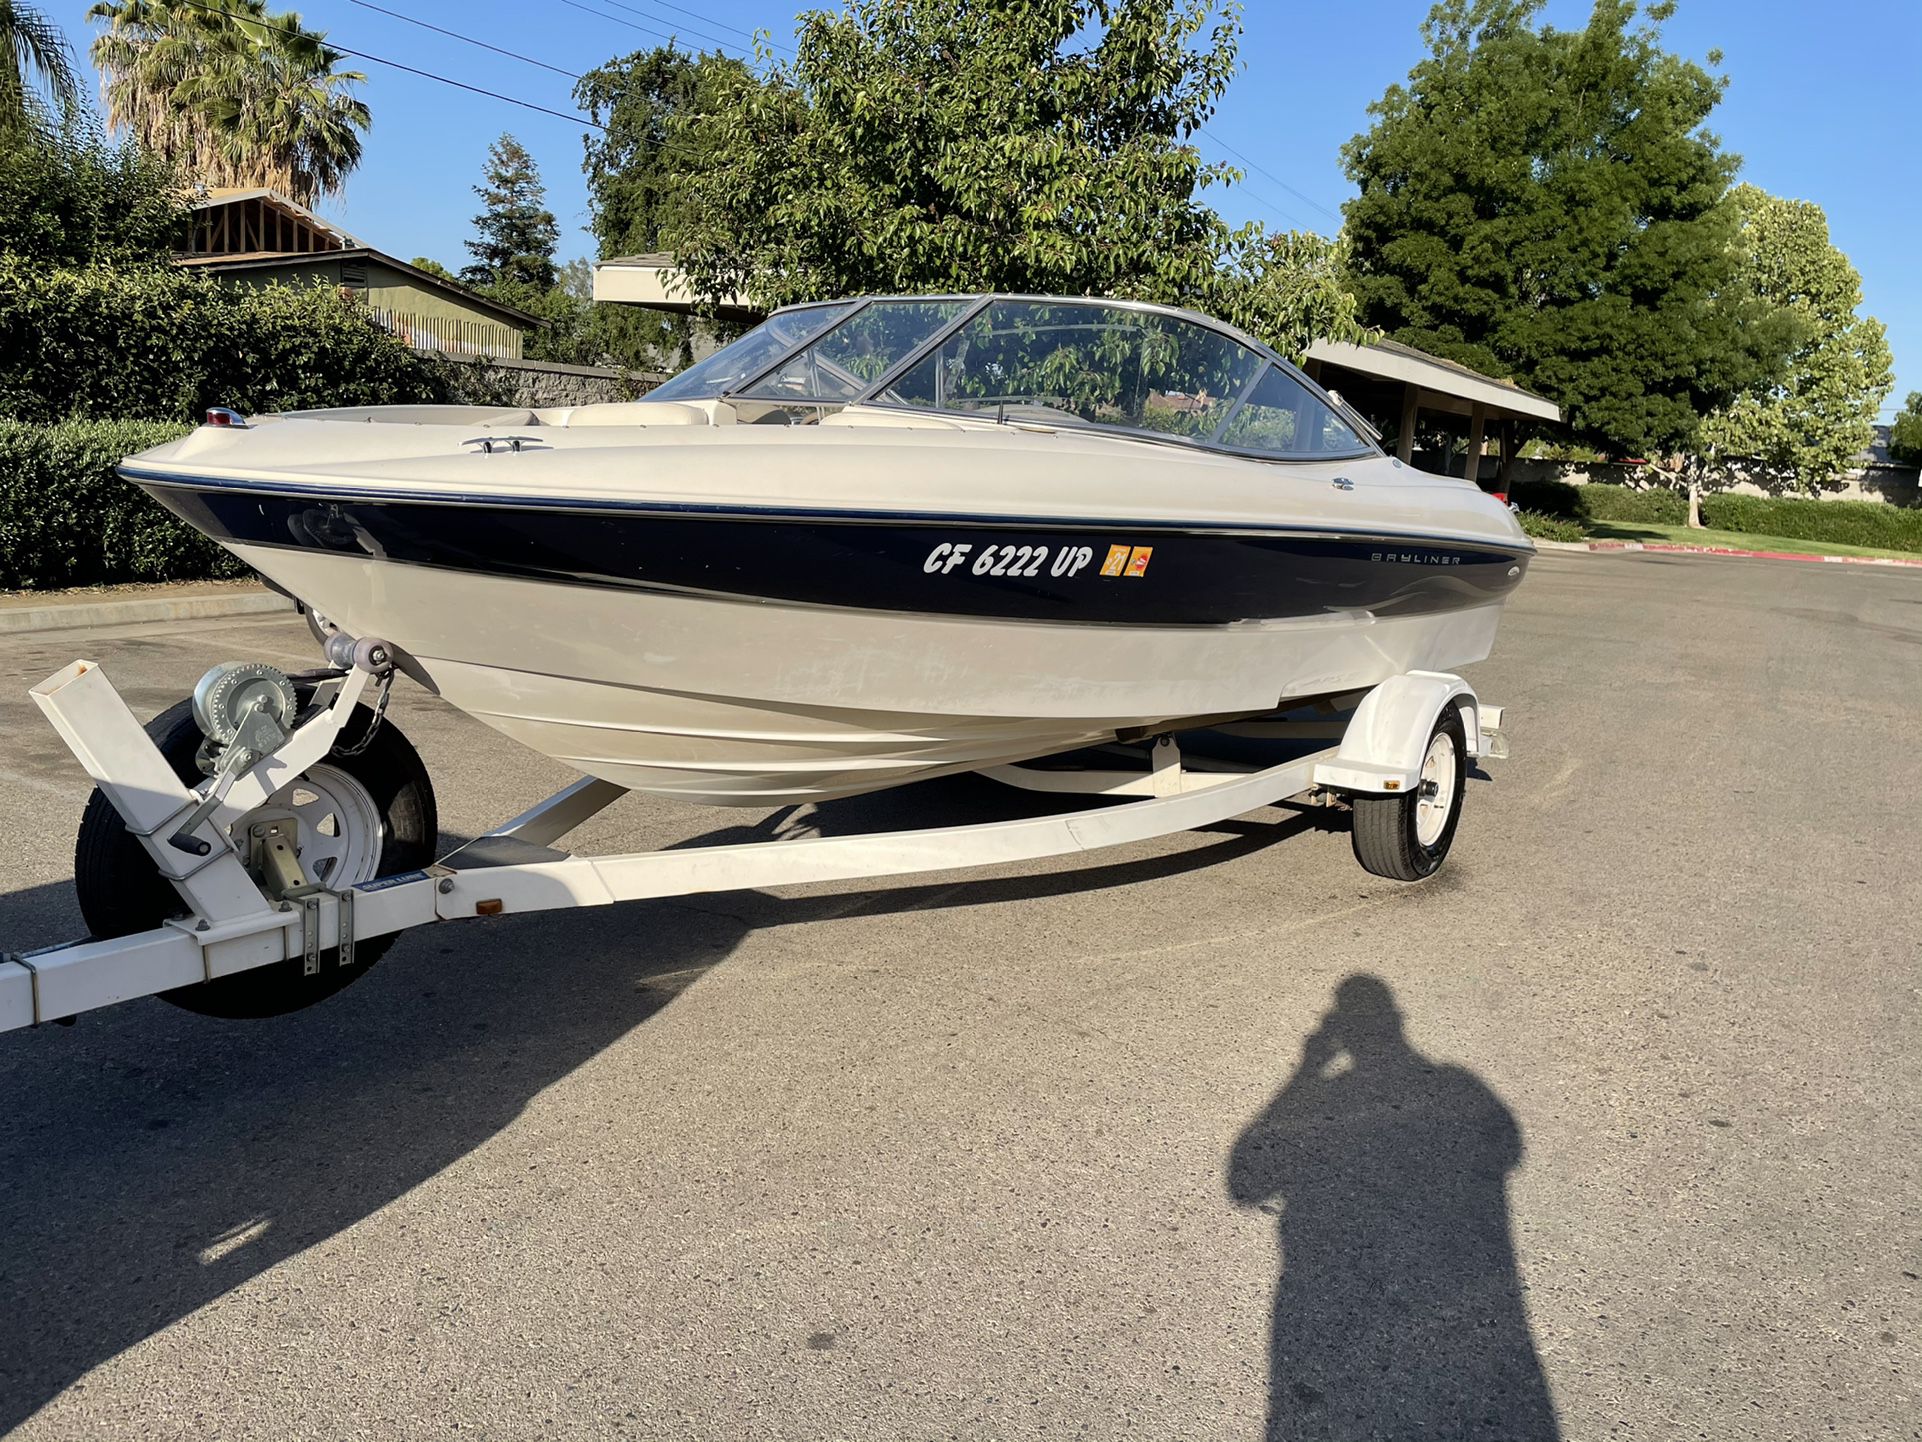 Photo 2002 Capri Bayliner Sport Limited With 202 Hours Clean Tittle On Vessel Tittle To Both Trailer And Vessal Well Maintenced Super Clean 19ft In Lenght